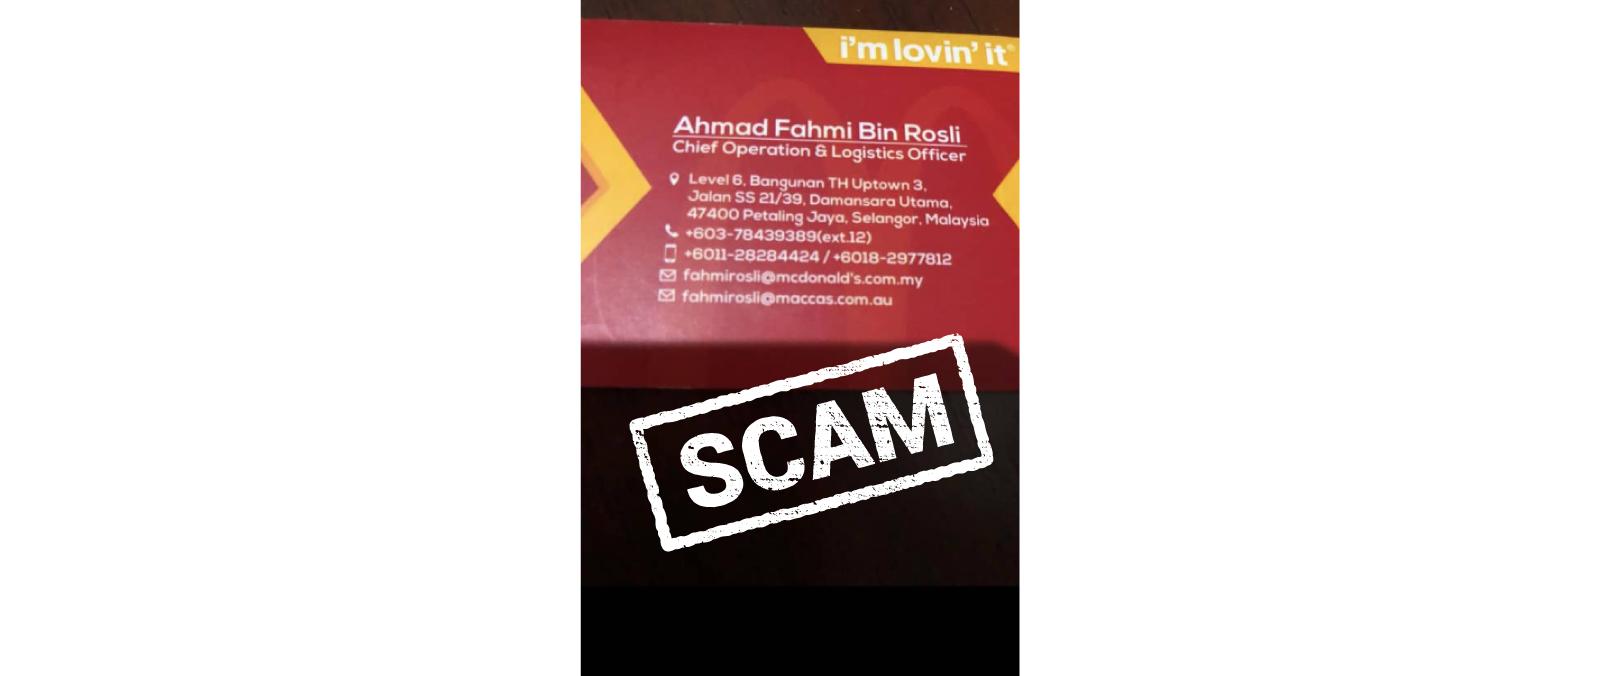 SCAM – IMPERSONATION AS A McDONALD’S MALAYSIA EMPLOYEE's image'